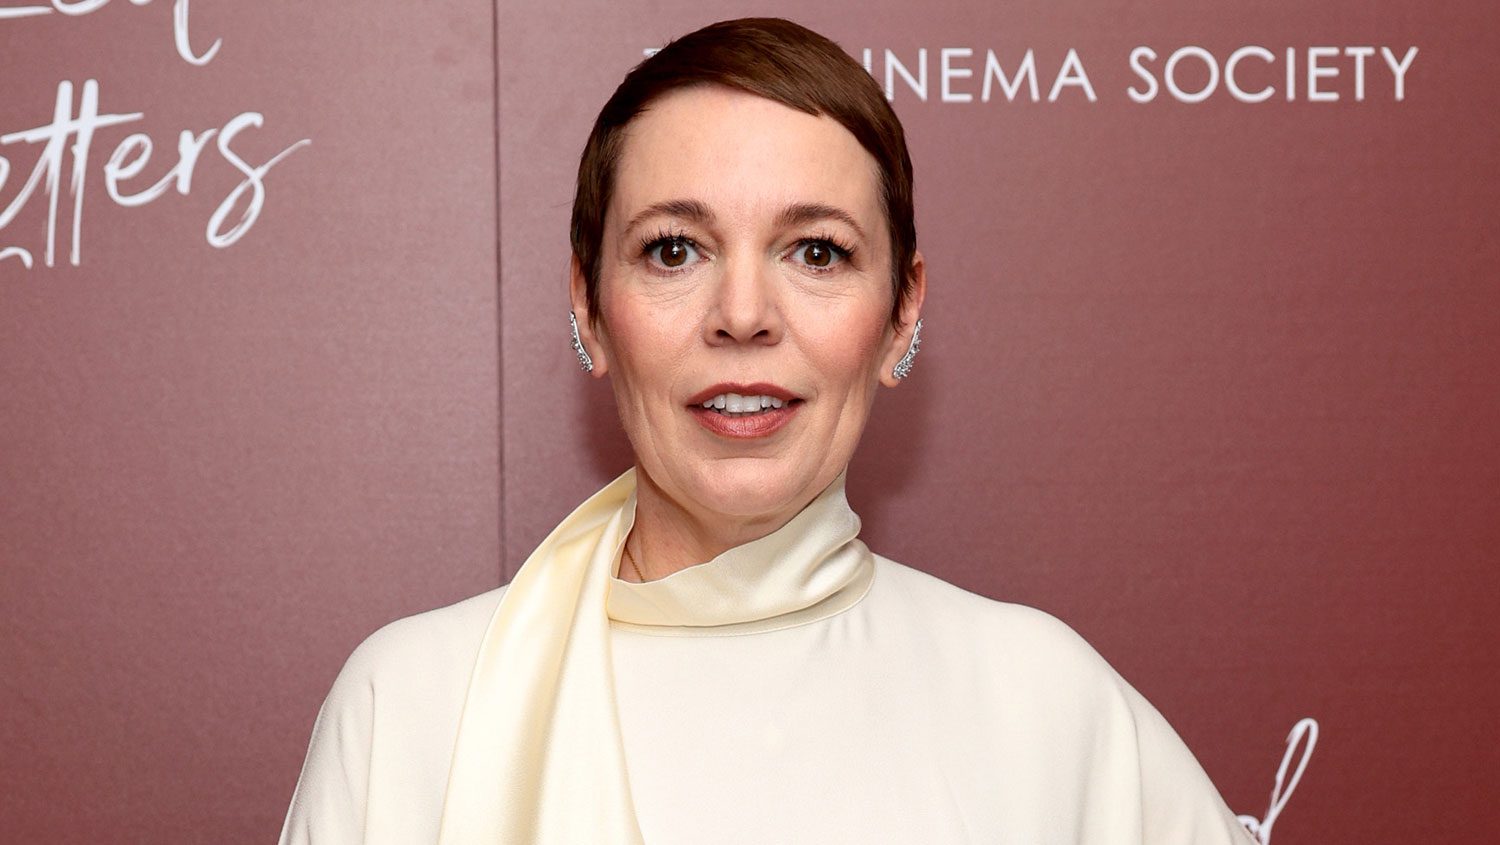 Olivia Colman On Pay Disparity In Hollywood: “If I Was Oliver Colman, I’d Be Earning A F*** Of A Lot More Than I Am”